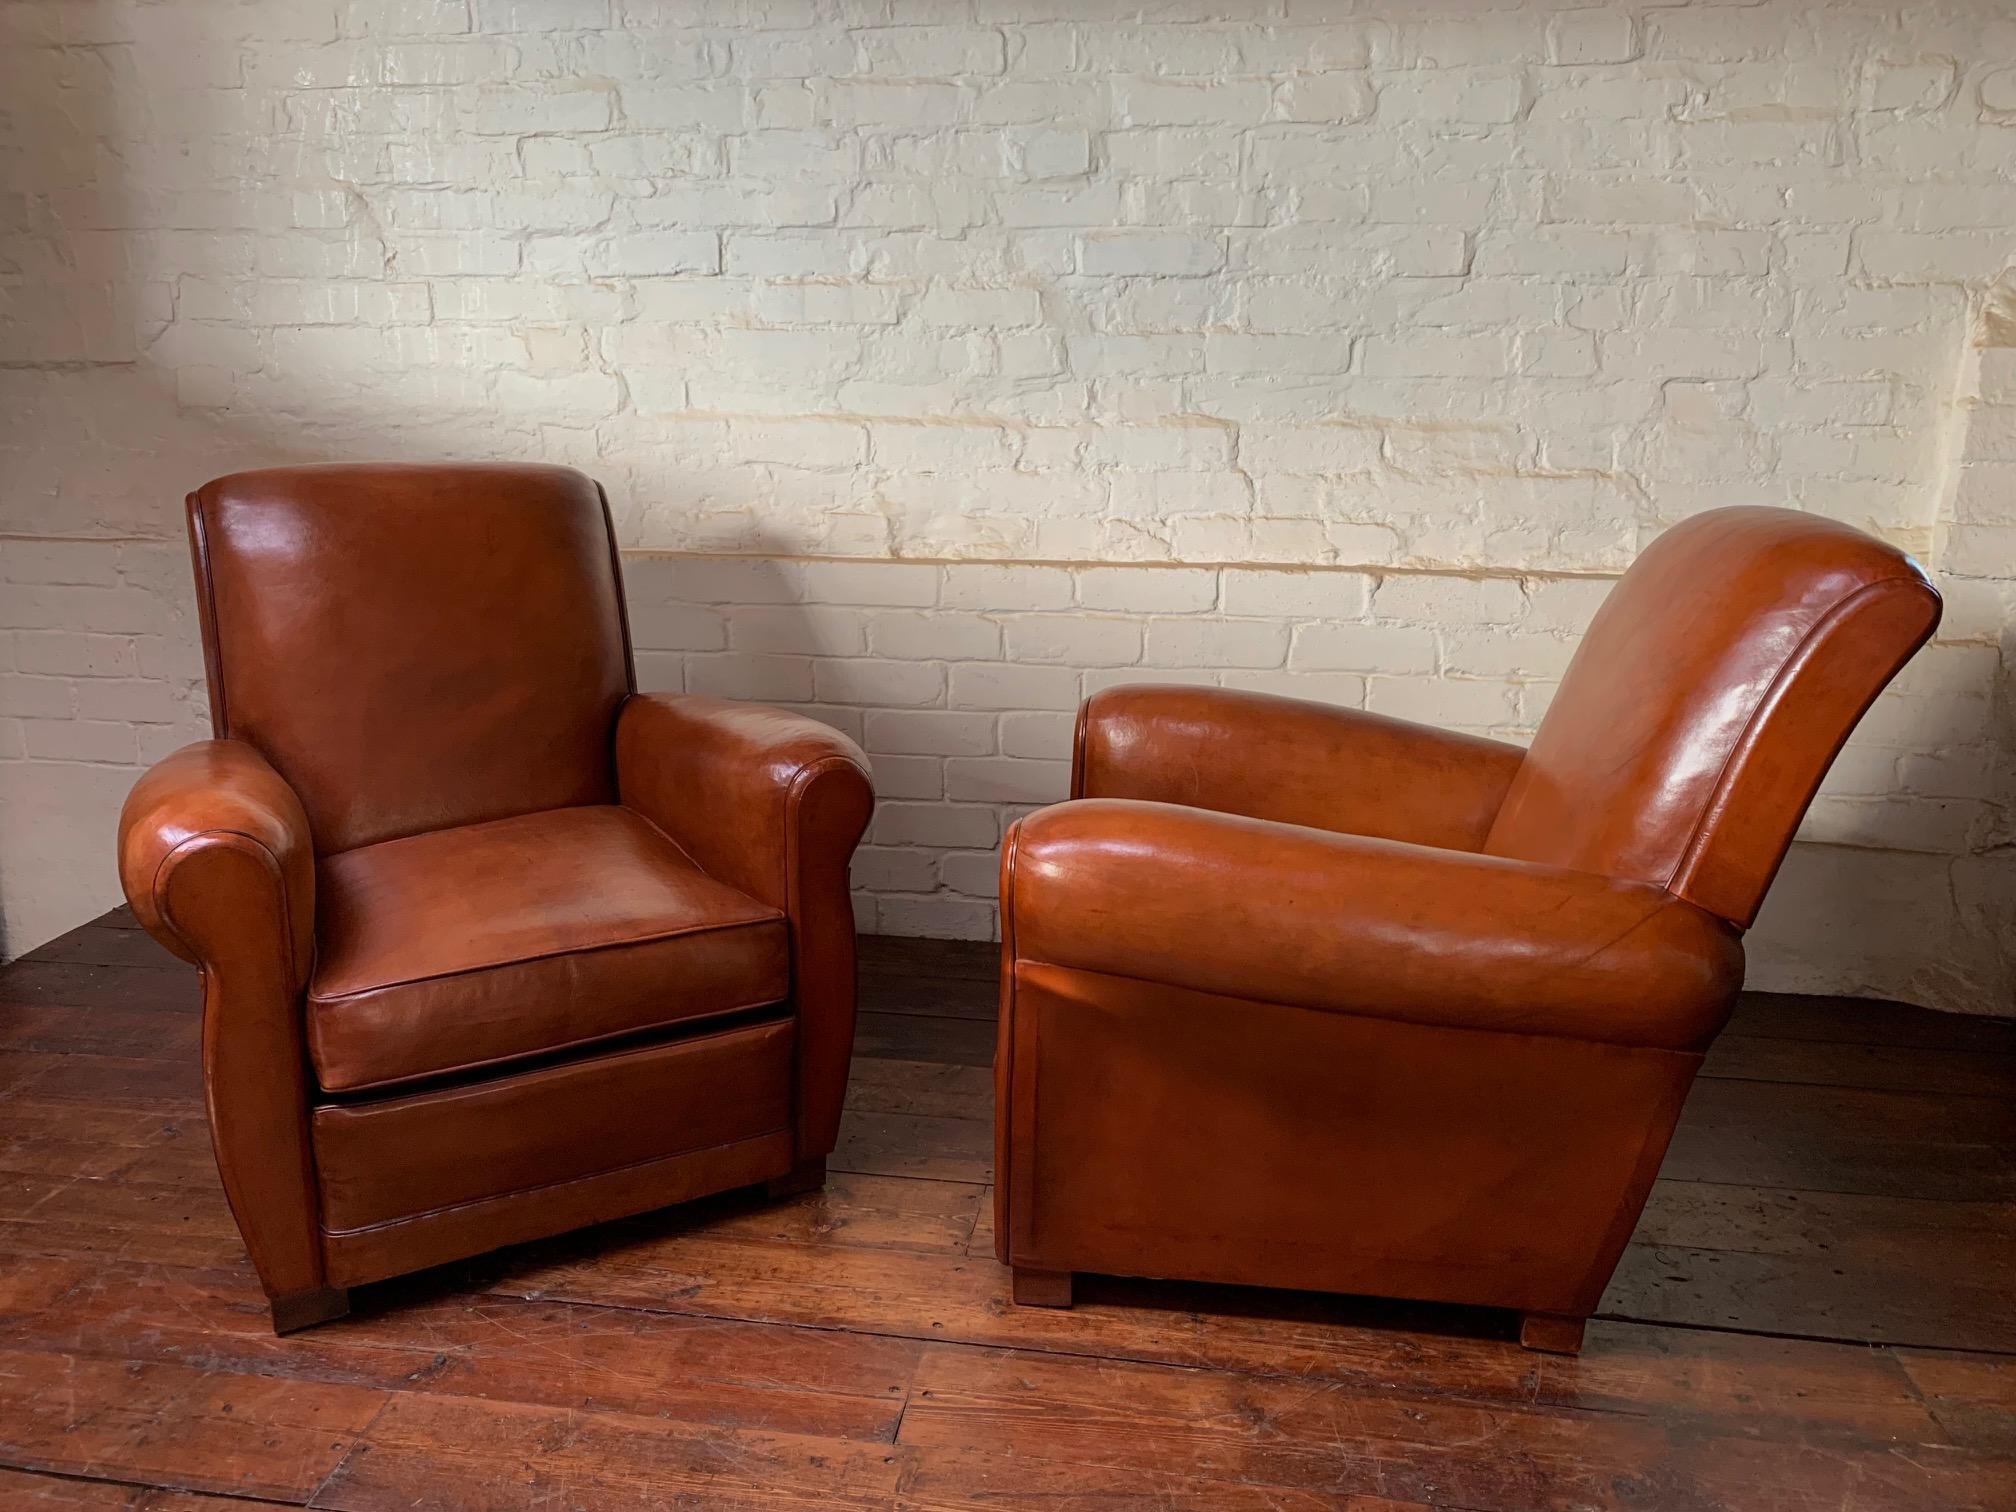 Art Deco A Superb Pair of French, Leather Club Chairs, Havana Lounge Models Circa 1940's